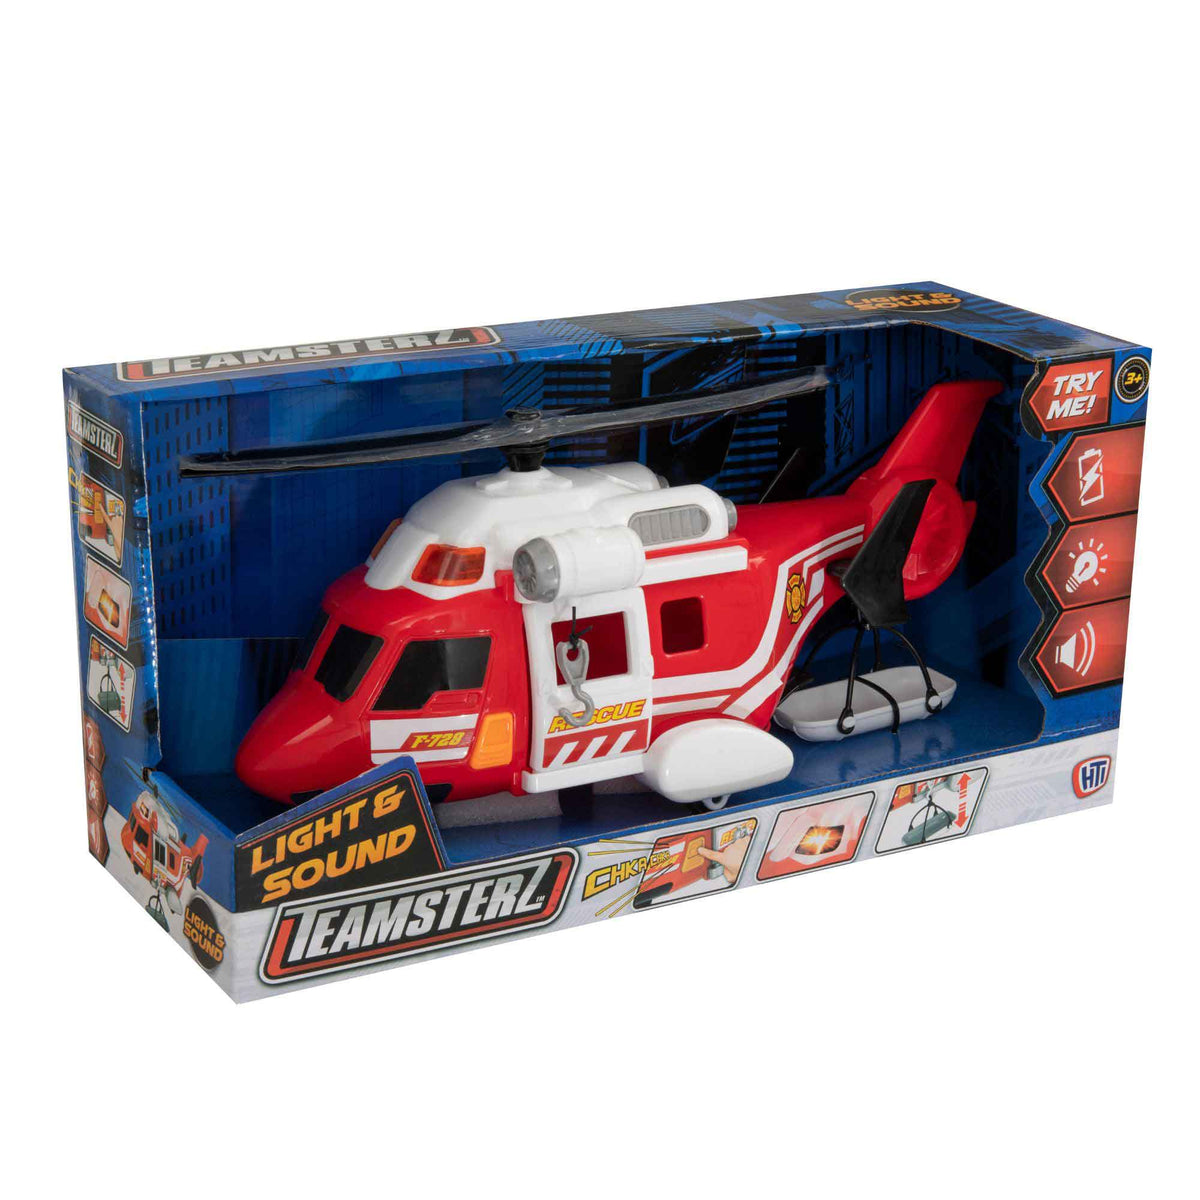 Teamsterz Medium Emergency Fire Rescue Toy Helicopter